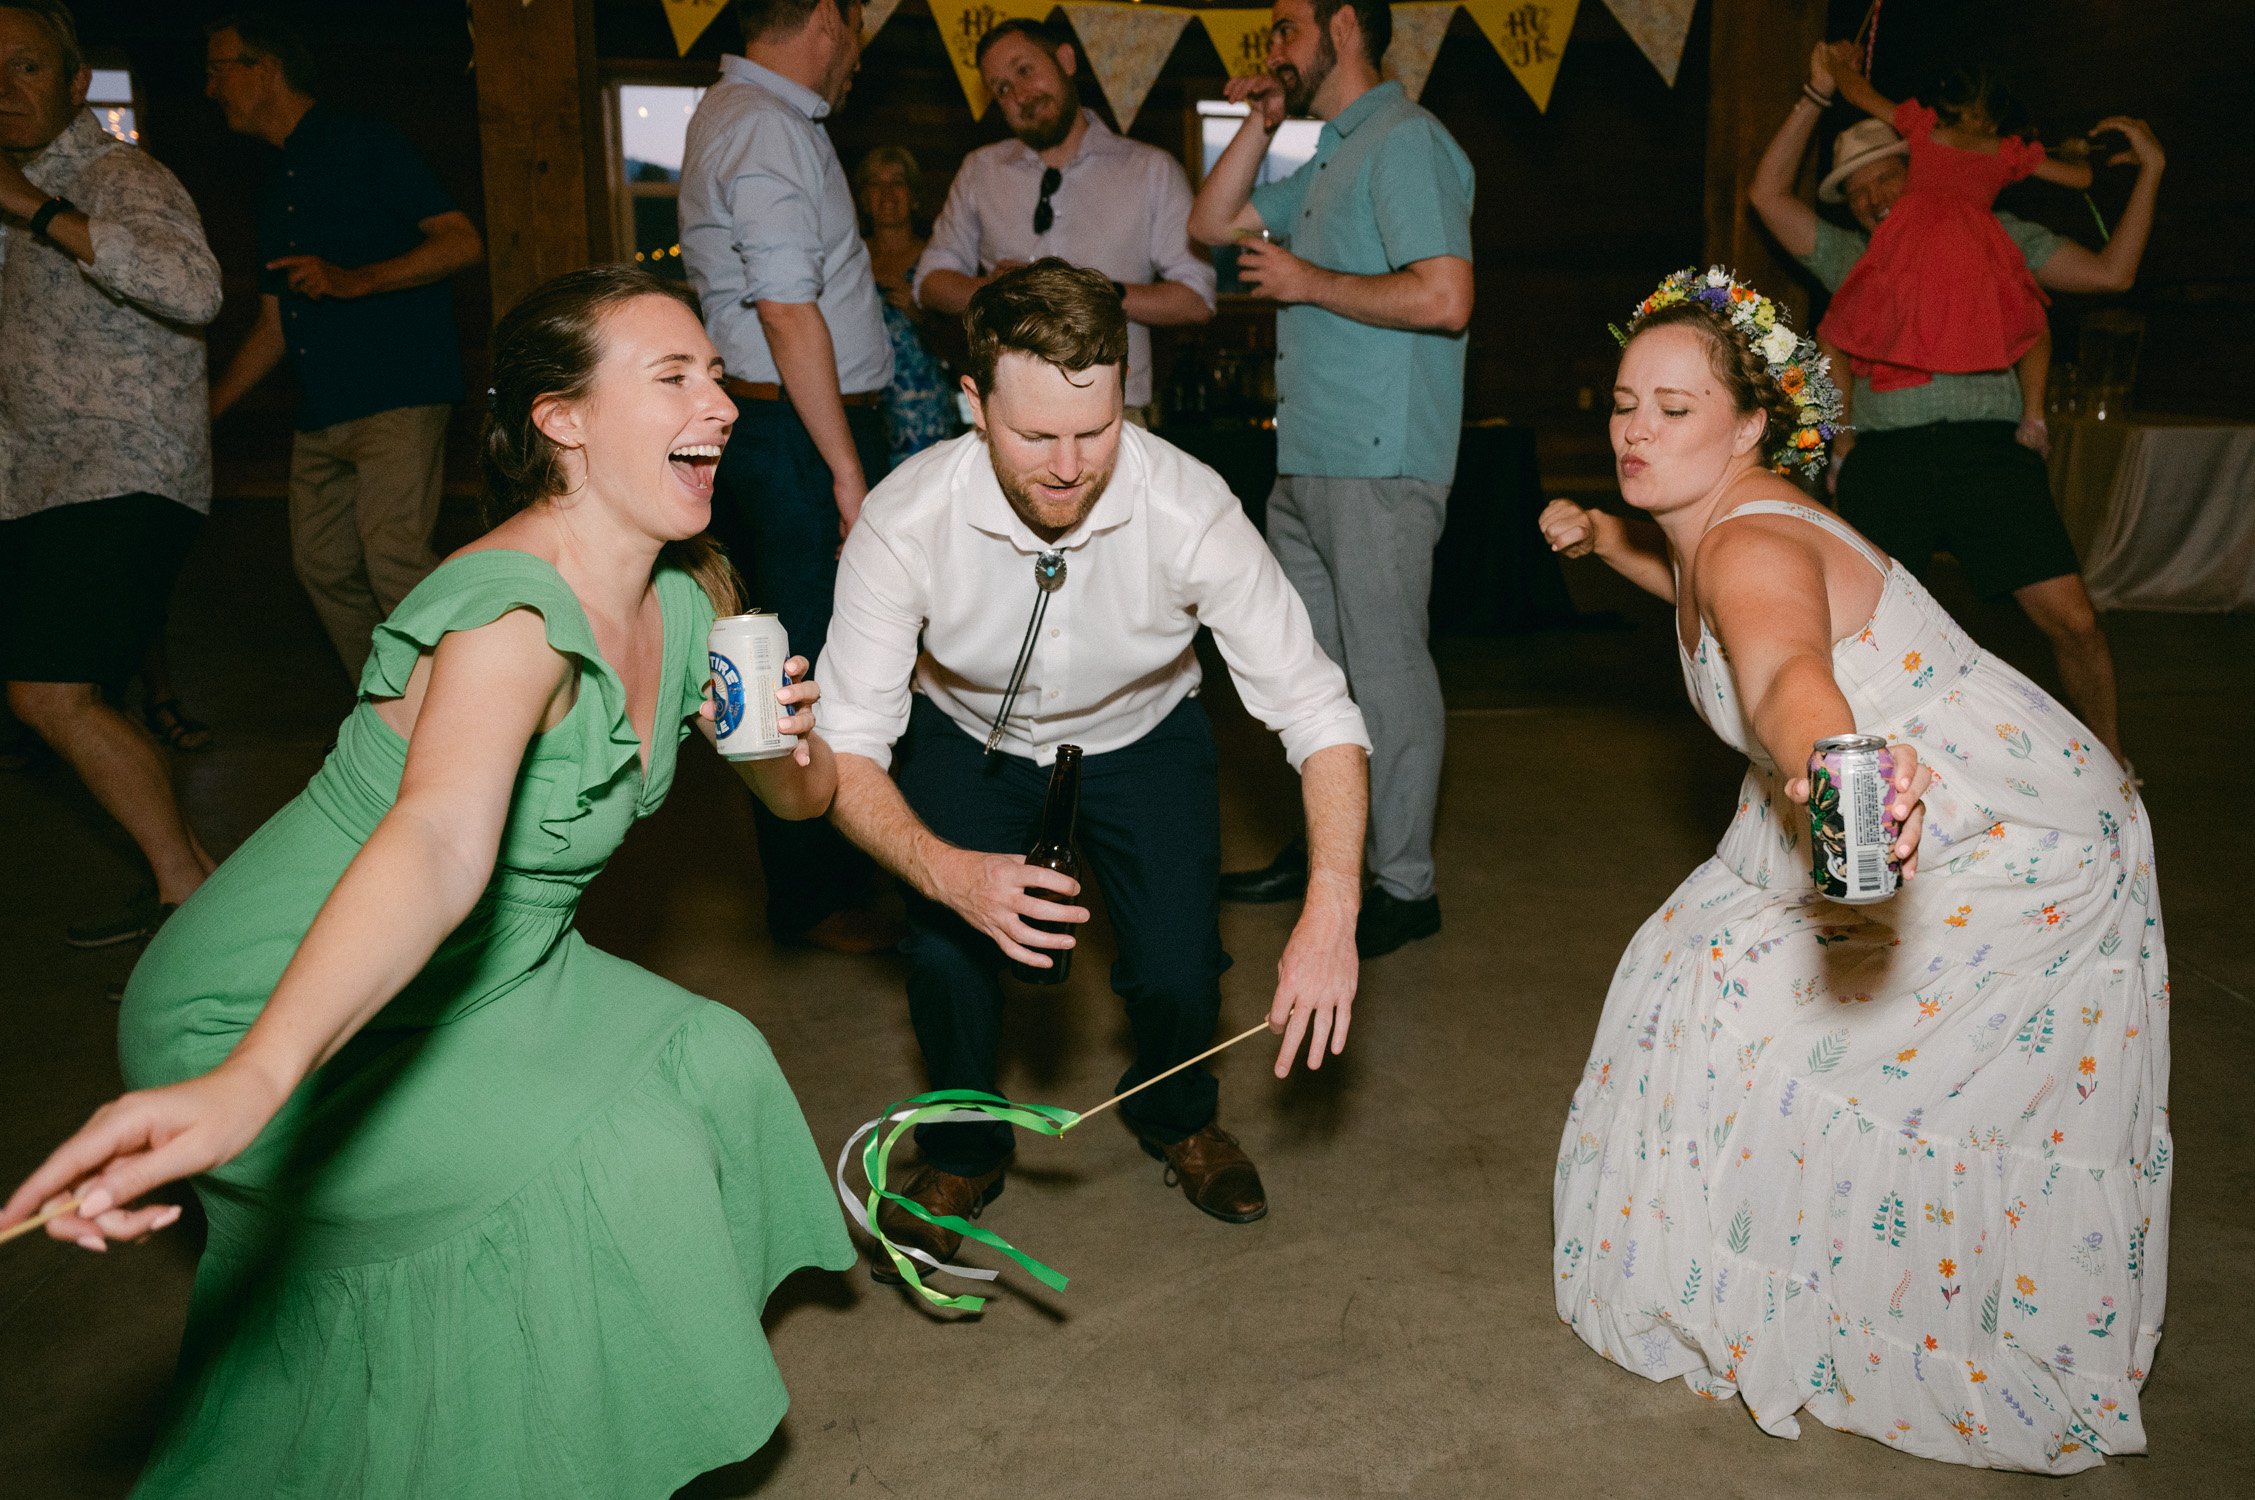 graeagle corner barn wedding, photo of the bride and guests dancing together